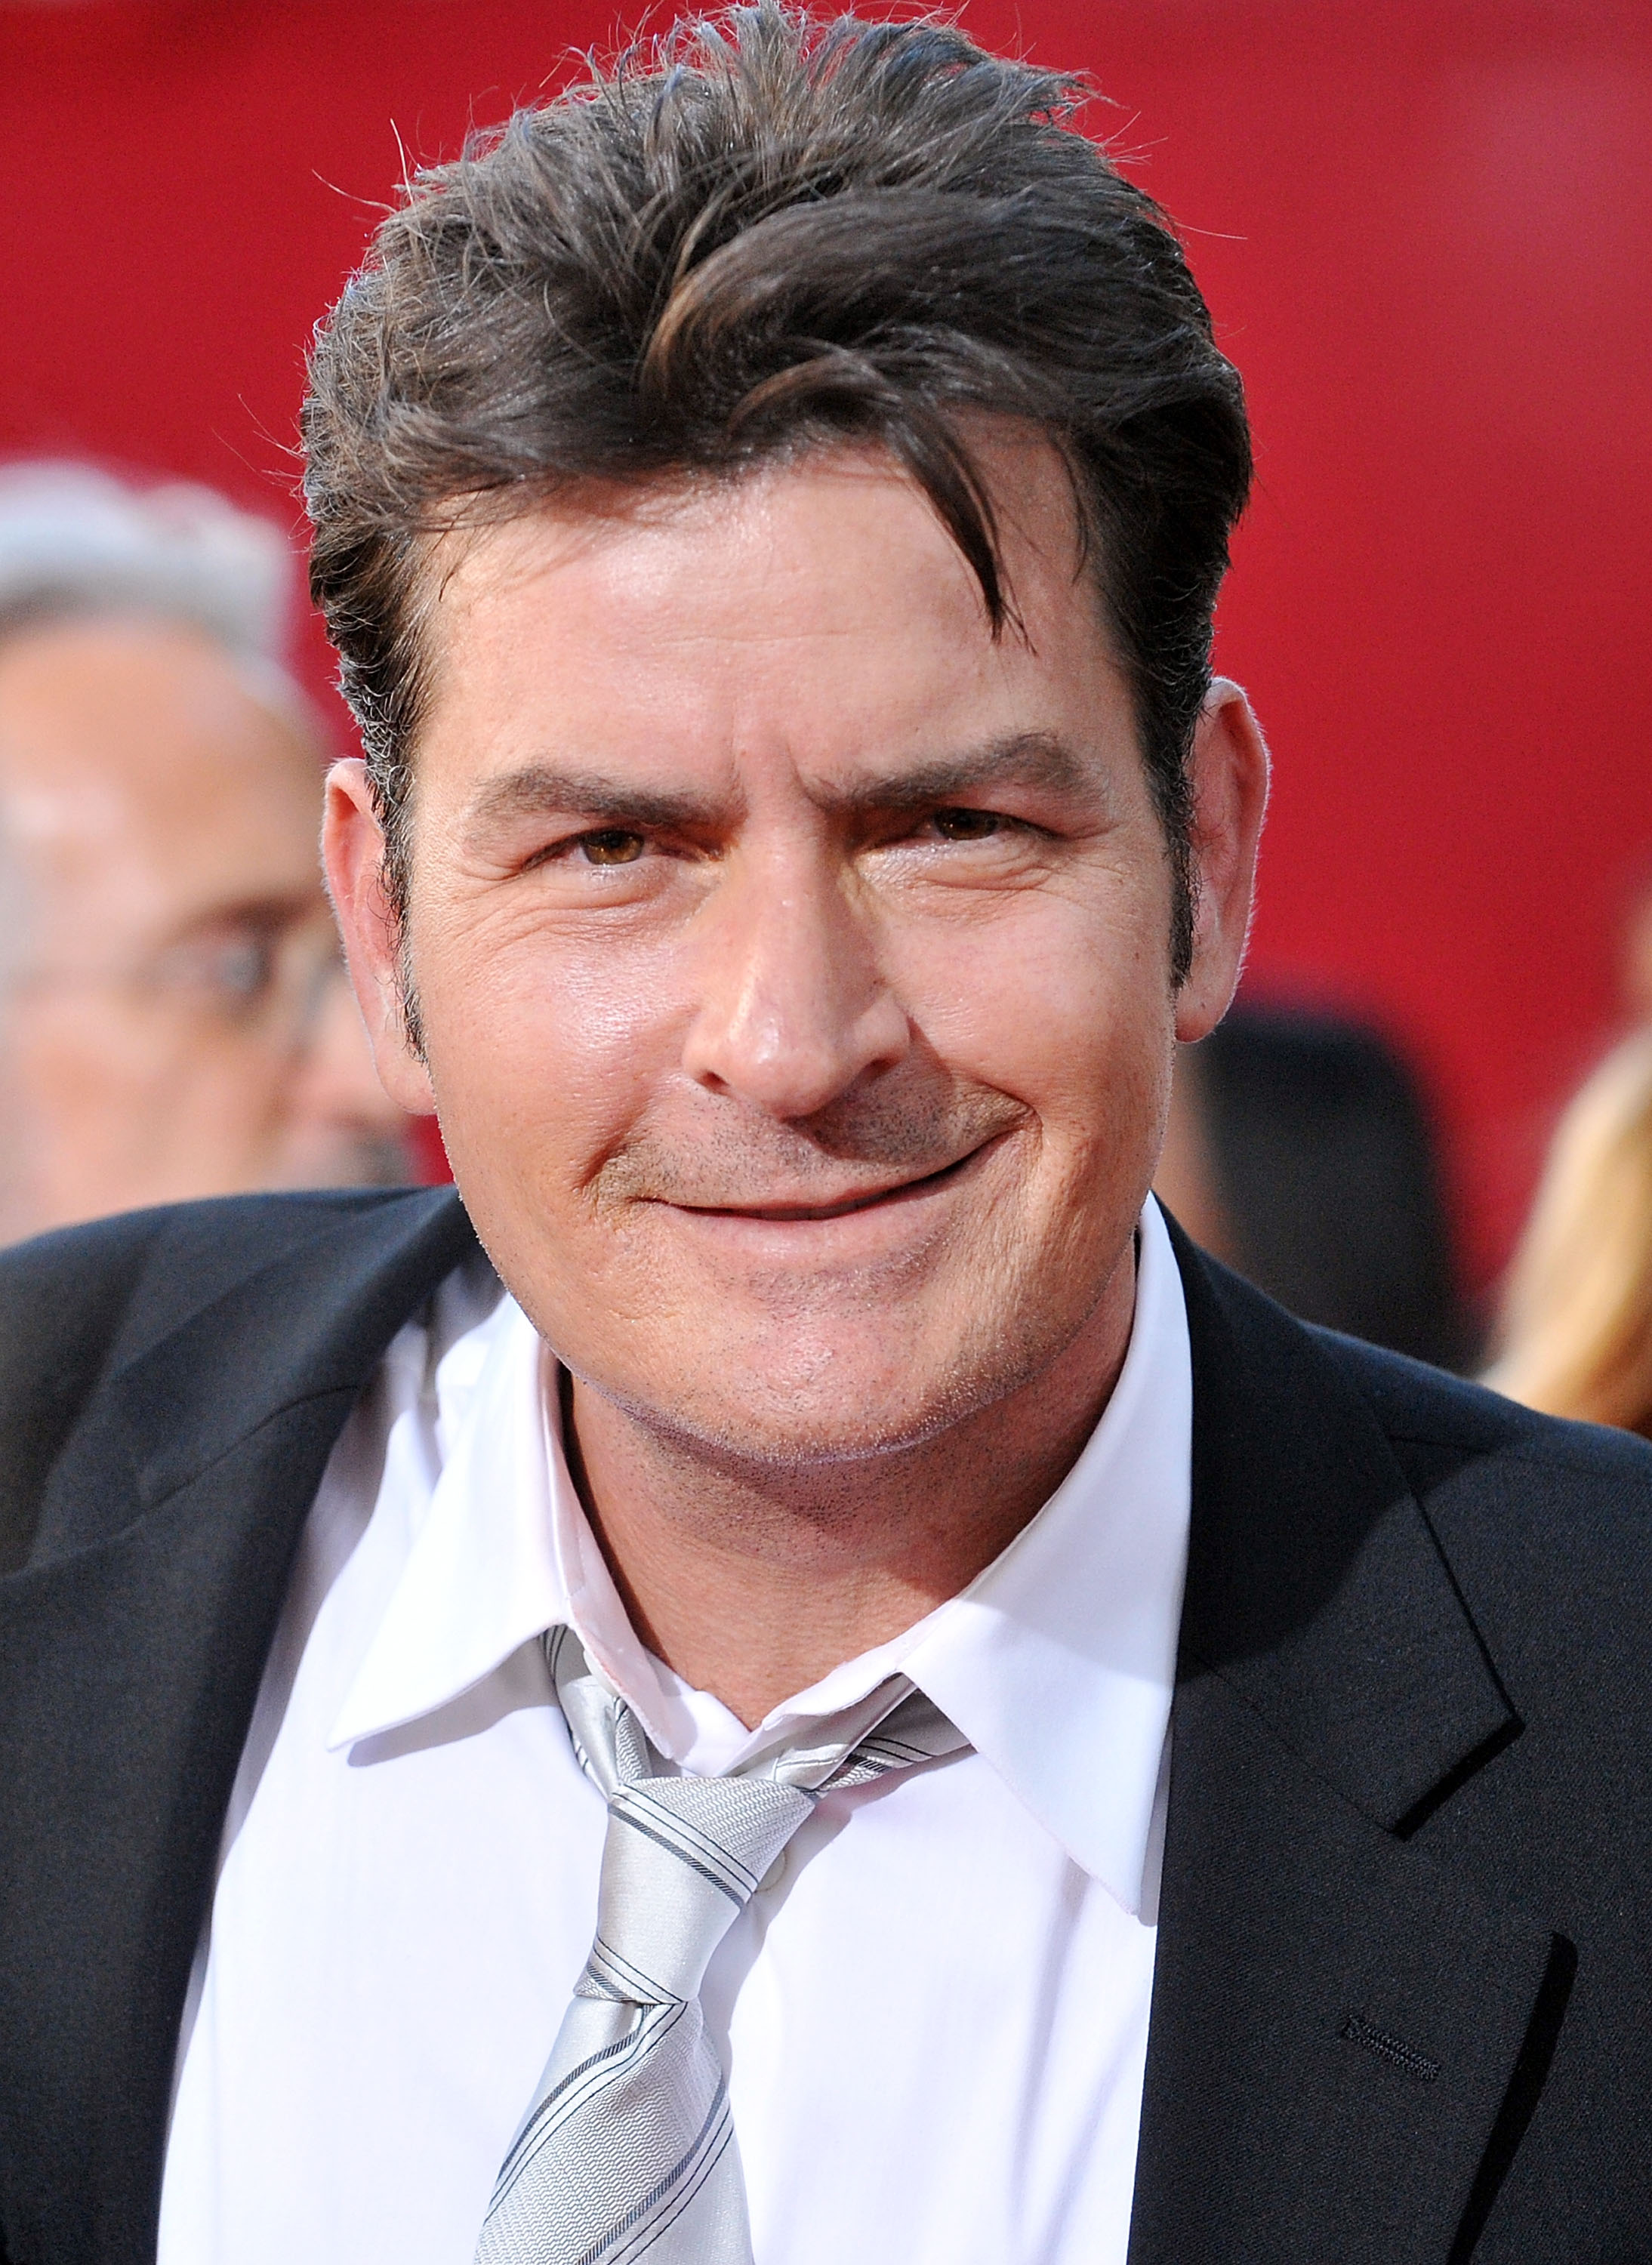 charlie-sheen-house